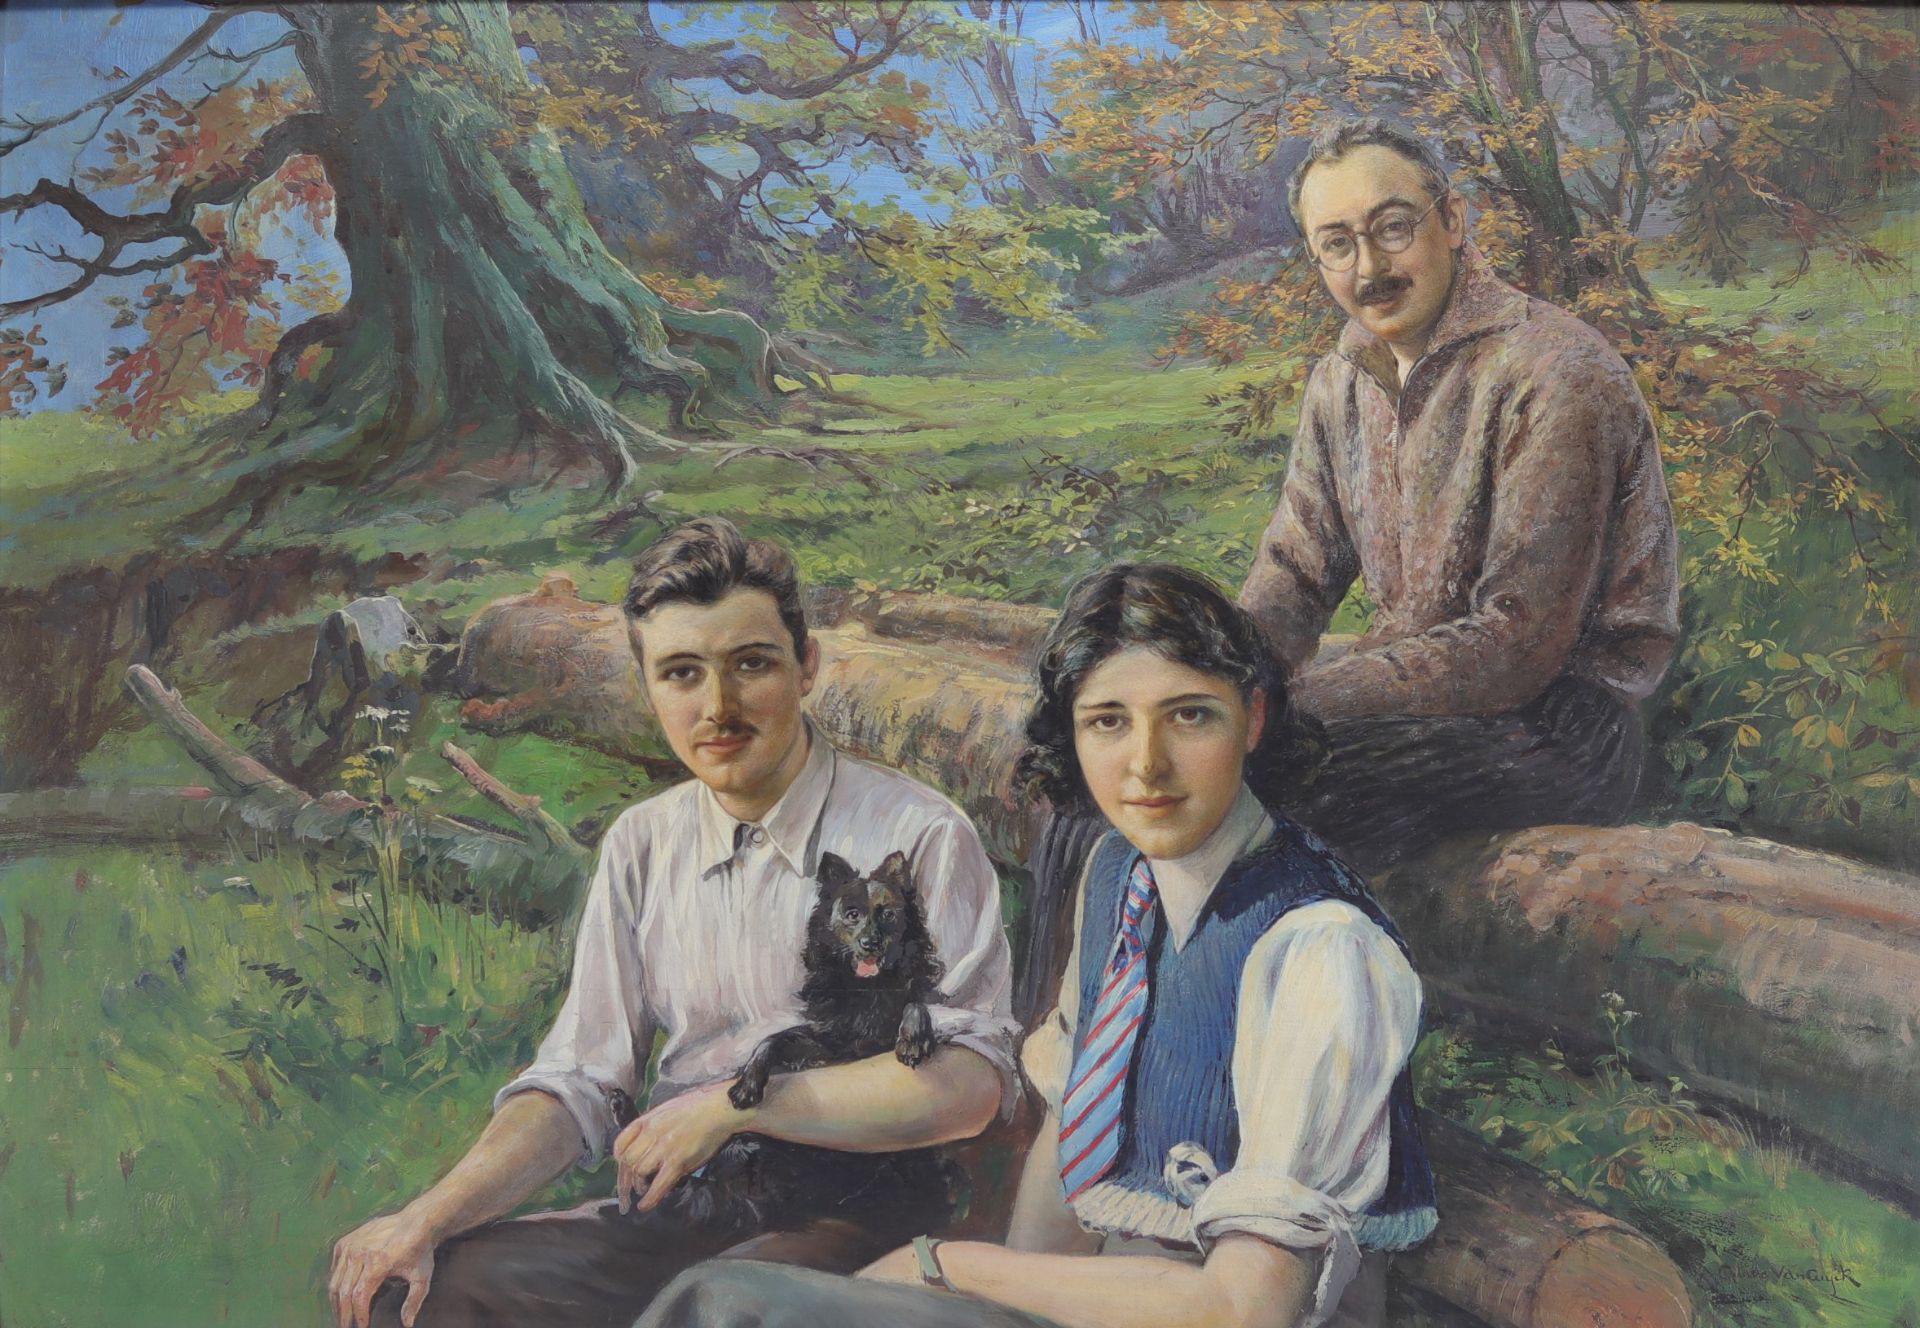 Octave Louis VAN CUYCK (1870-1956) "Family Portrait" Large oil on panel.